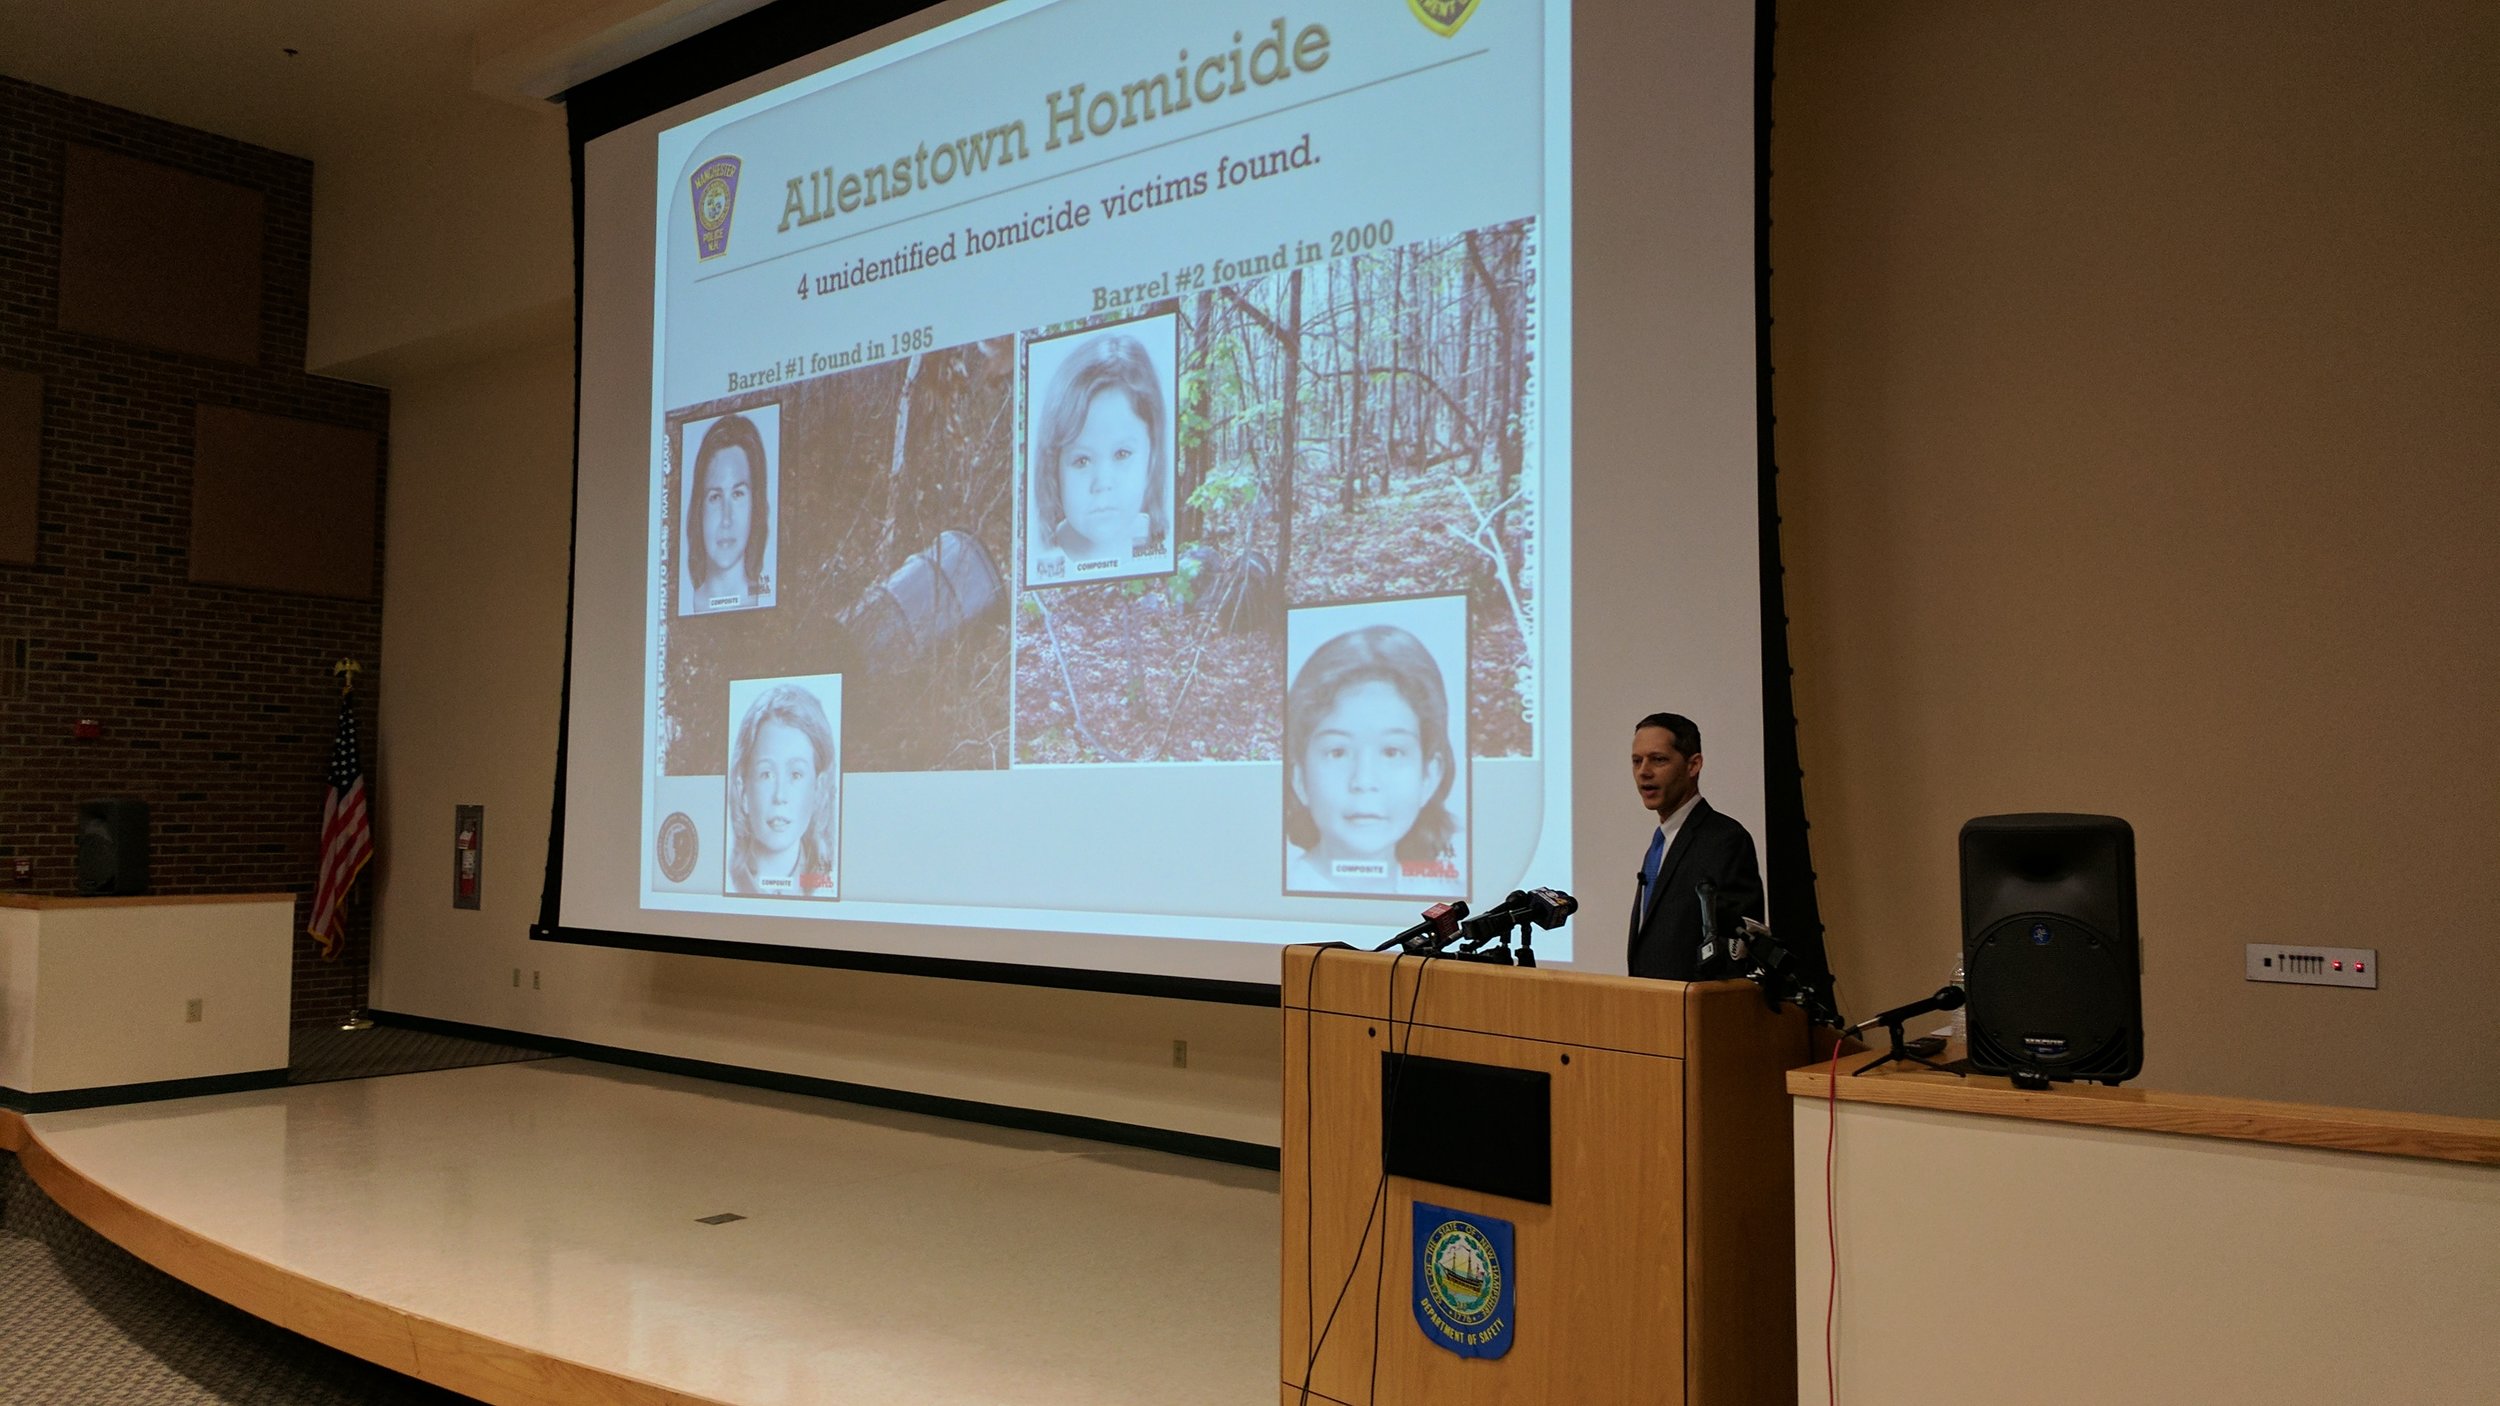  At a 2017 press conference, Senior Assistant Attorney General Jeff Strelzin announced that while the Allenstown victims were still unidentified, their killer was known. 